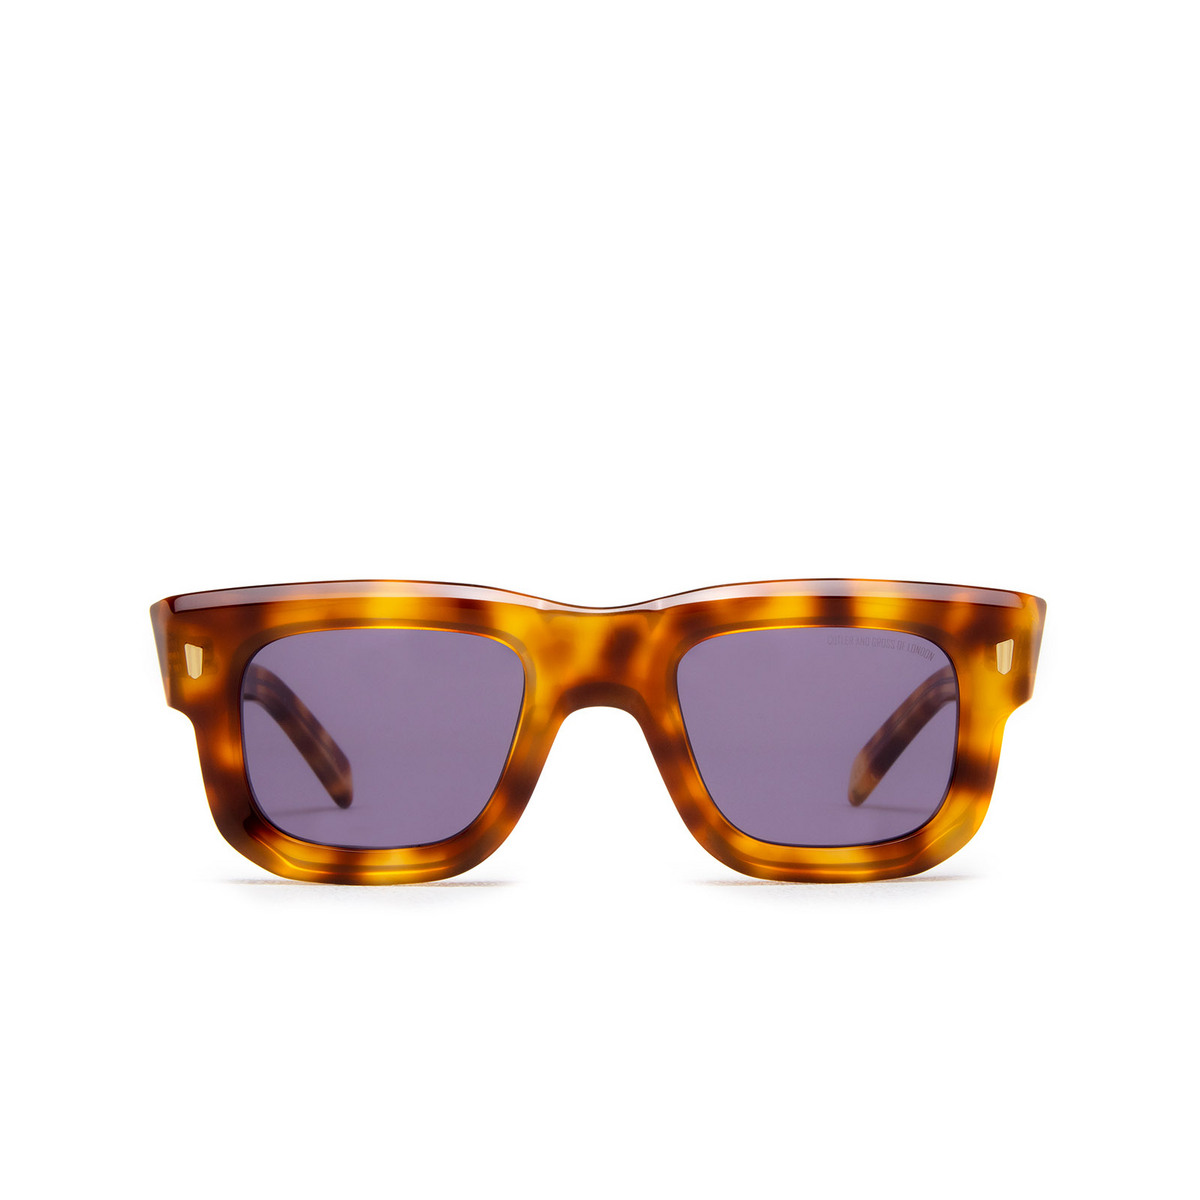 Cutler and Gross 1402 Sunglasses 02 Old Havana - front view